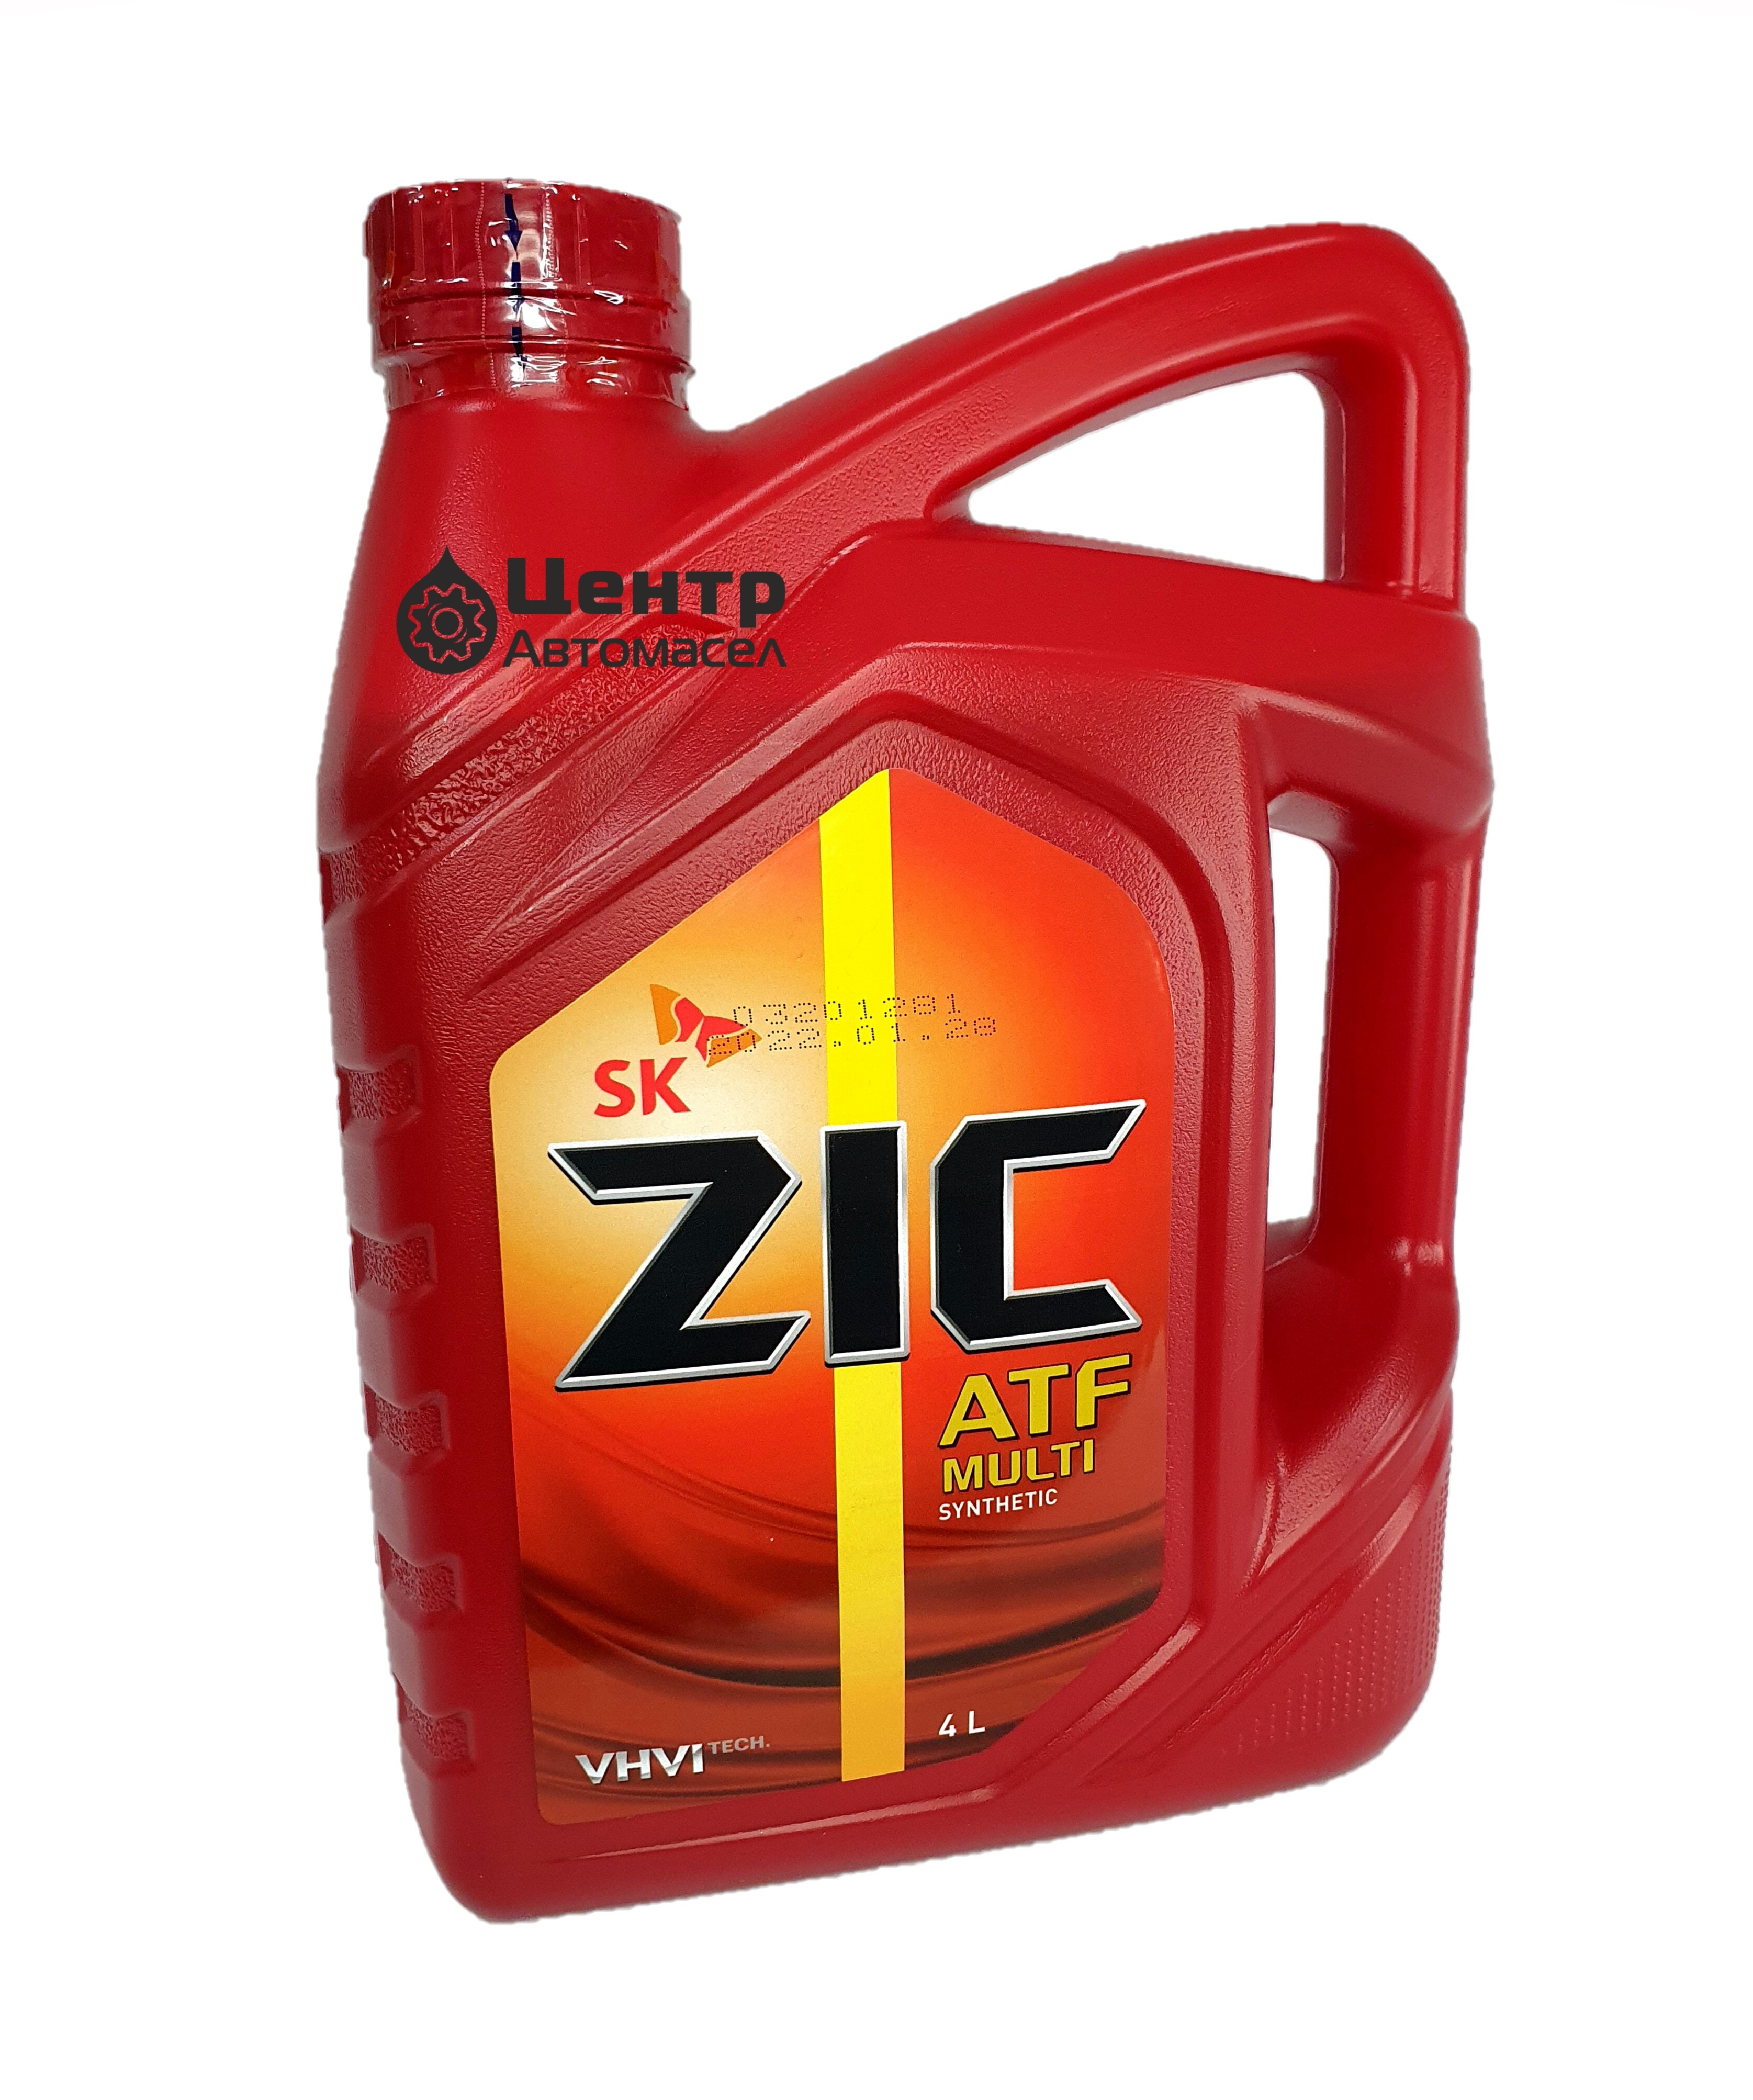 Масло zic atf multi lf. ZIC ATF Multi Synthetic. Масло трансмиссионное ZIC ATF Multi 4л. Масло трансмиссионное ZIC ATF Dexron 6, 4 л. 162630. ZIC 162665.